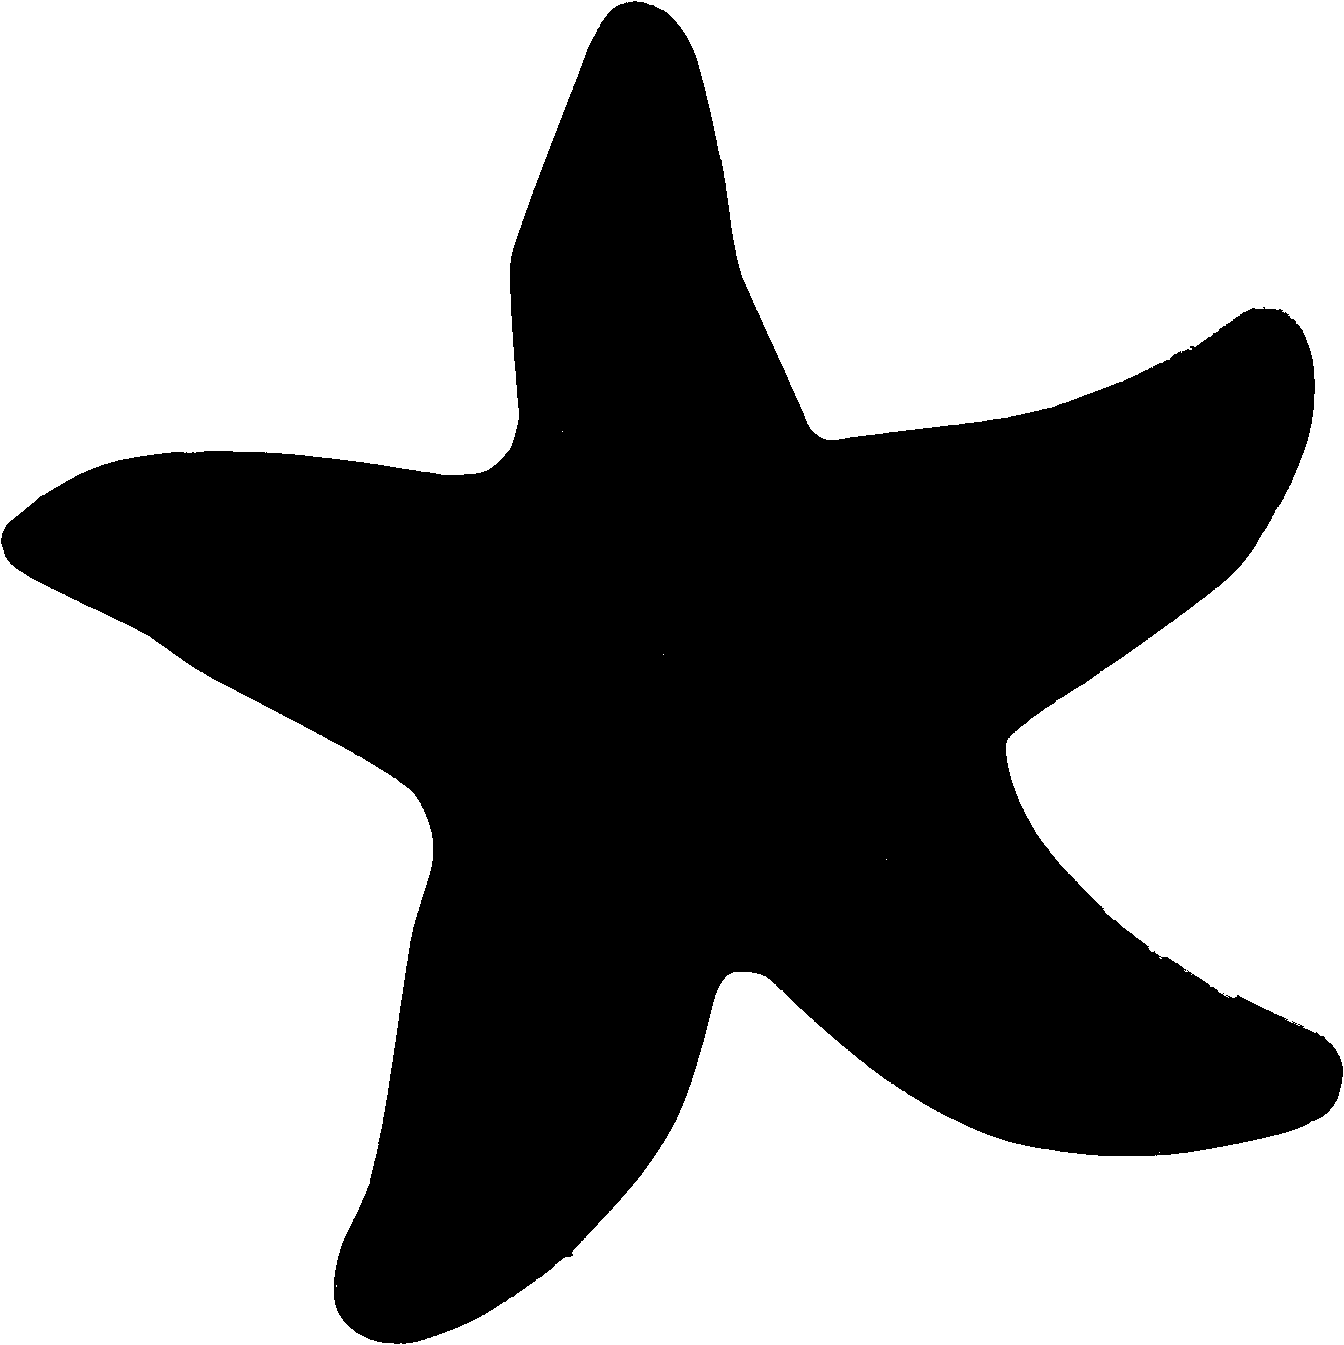 Starfish clipart outline